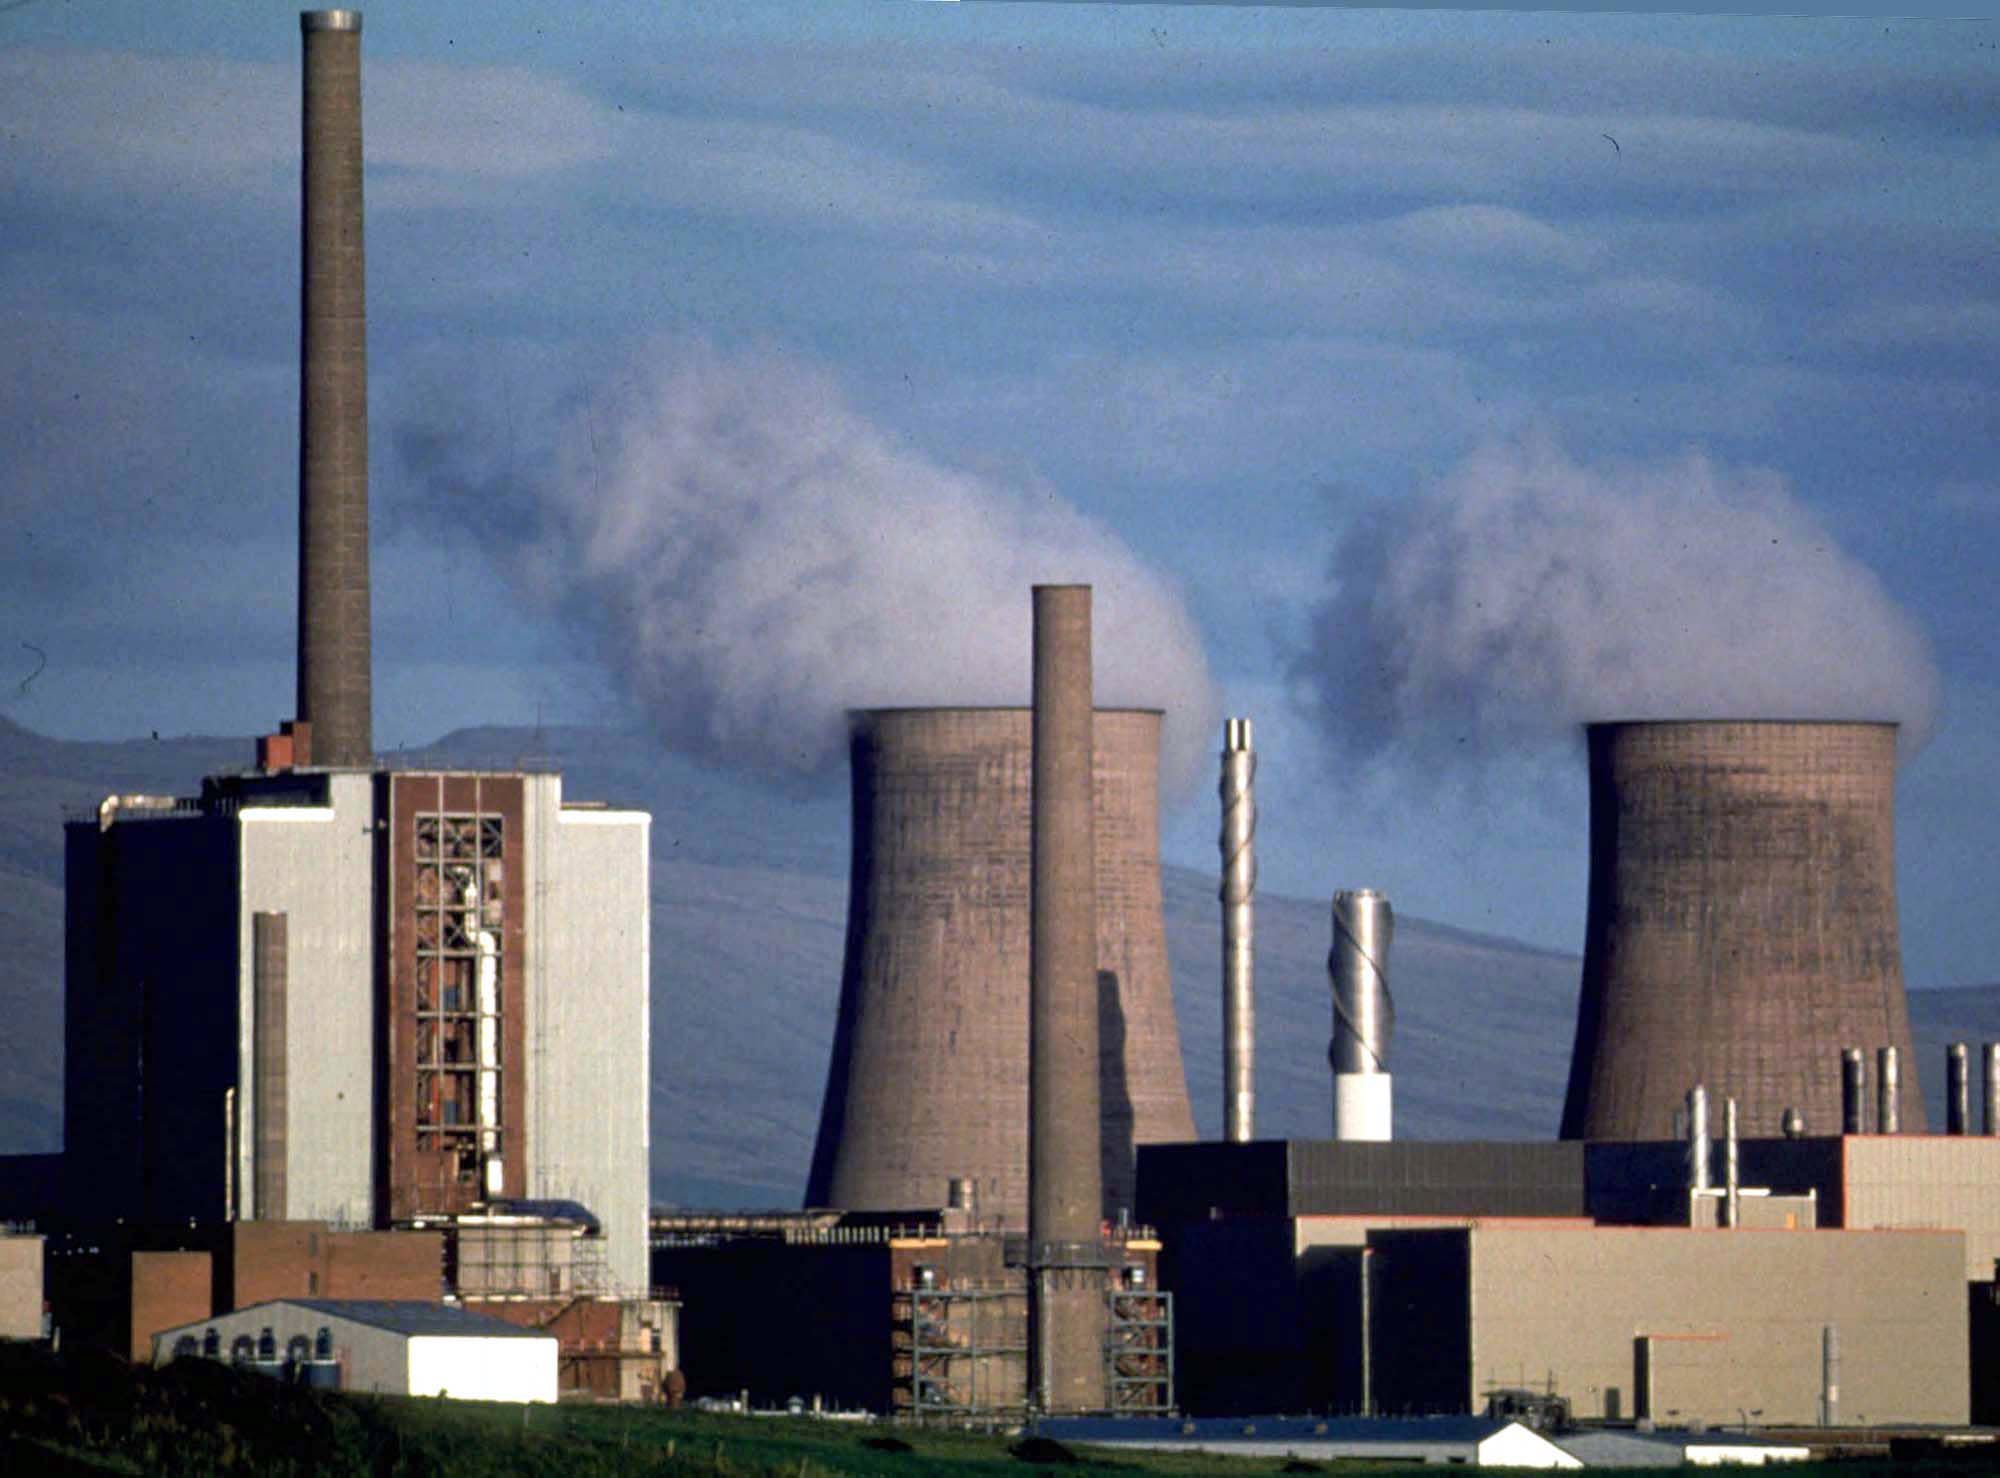 ** FILE ** This undated file picture provided by the environmental organization Greenpeace shows the British nuclear reprocessing plant Sellafield in northwestern England. The plant cannot account for nearly 30 kilograms (66 pounds) of plutonium, but authorities believe it's an accounting issue rather than a loss of potential bomb-making material, the U.K. Atomic Energy Authority said Thursday Feb. 17, 2005. (AP Photo/Greenpeace, Sabine Vielmo)